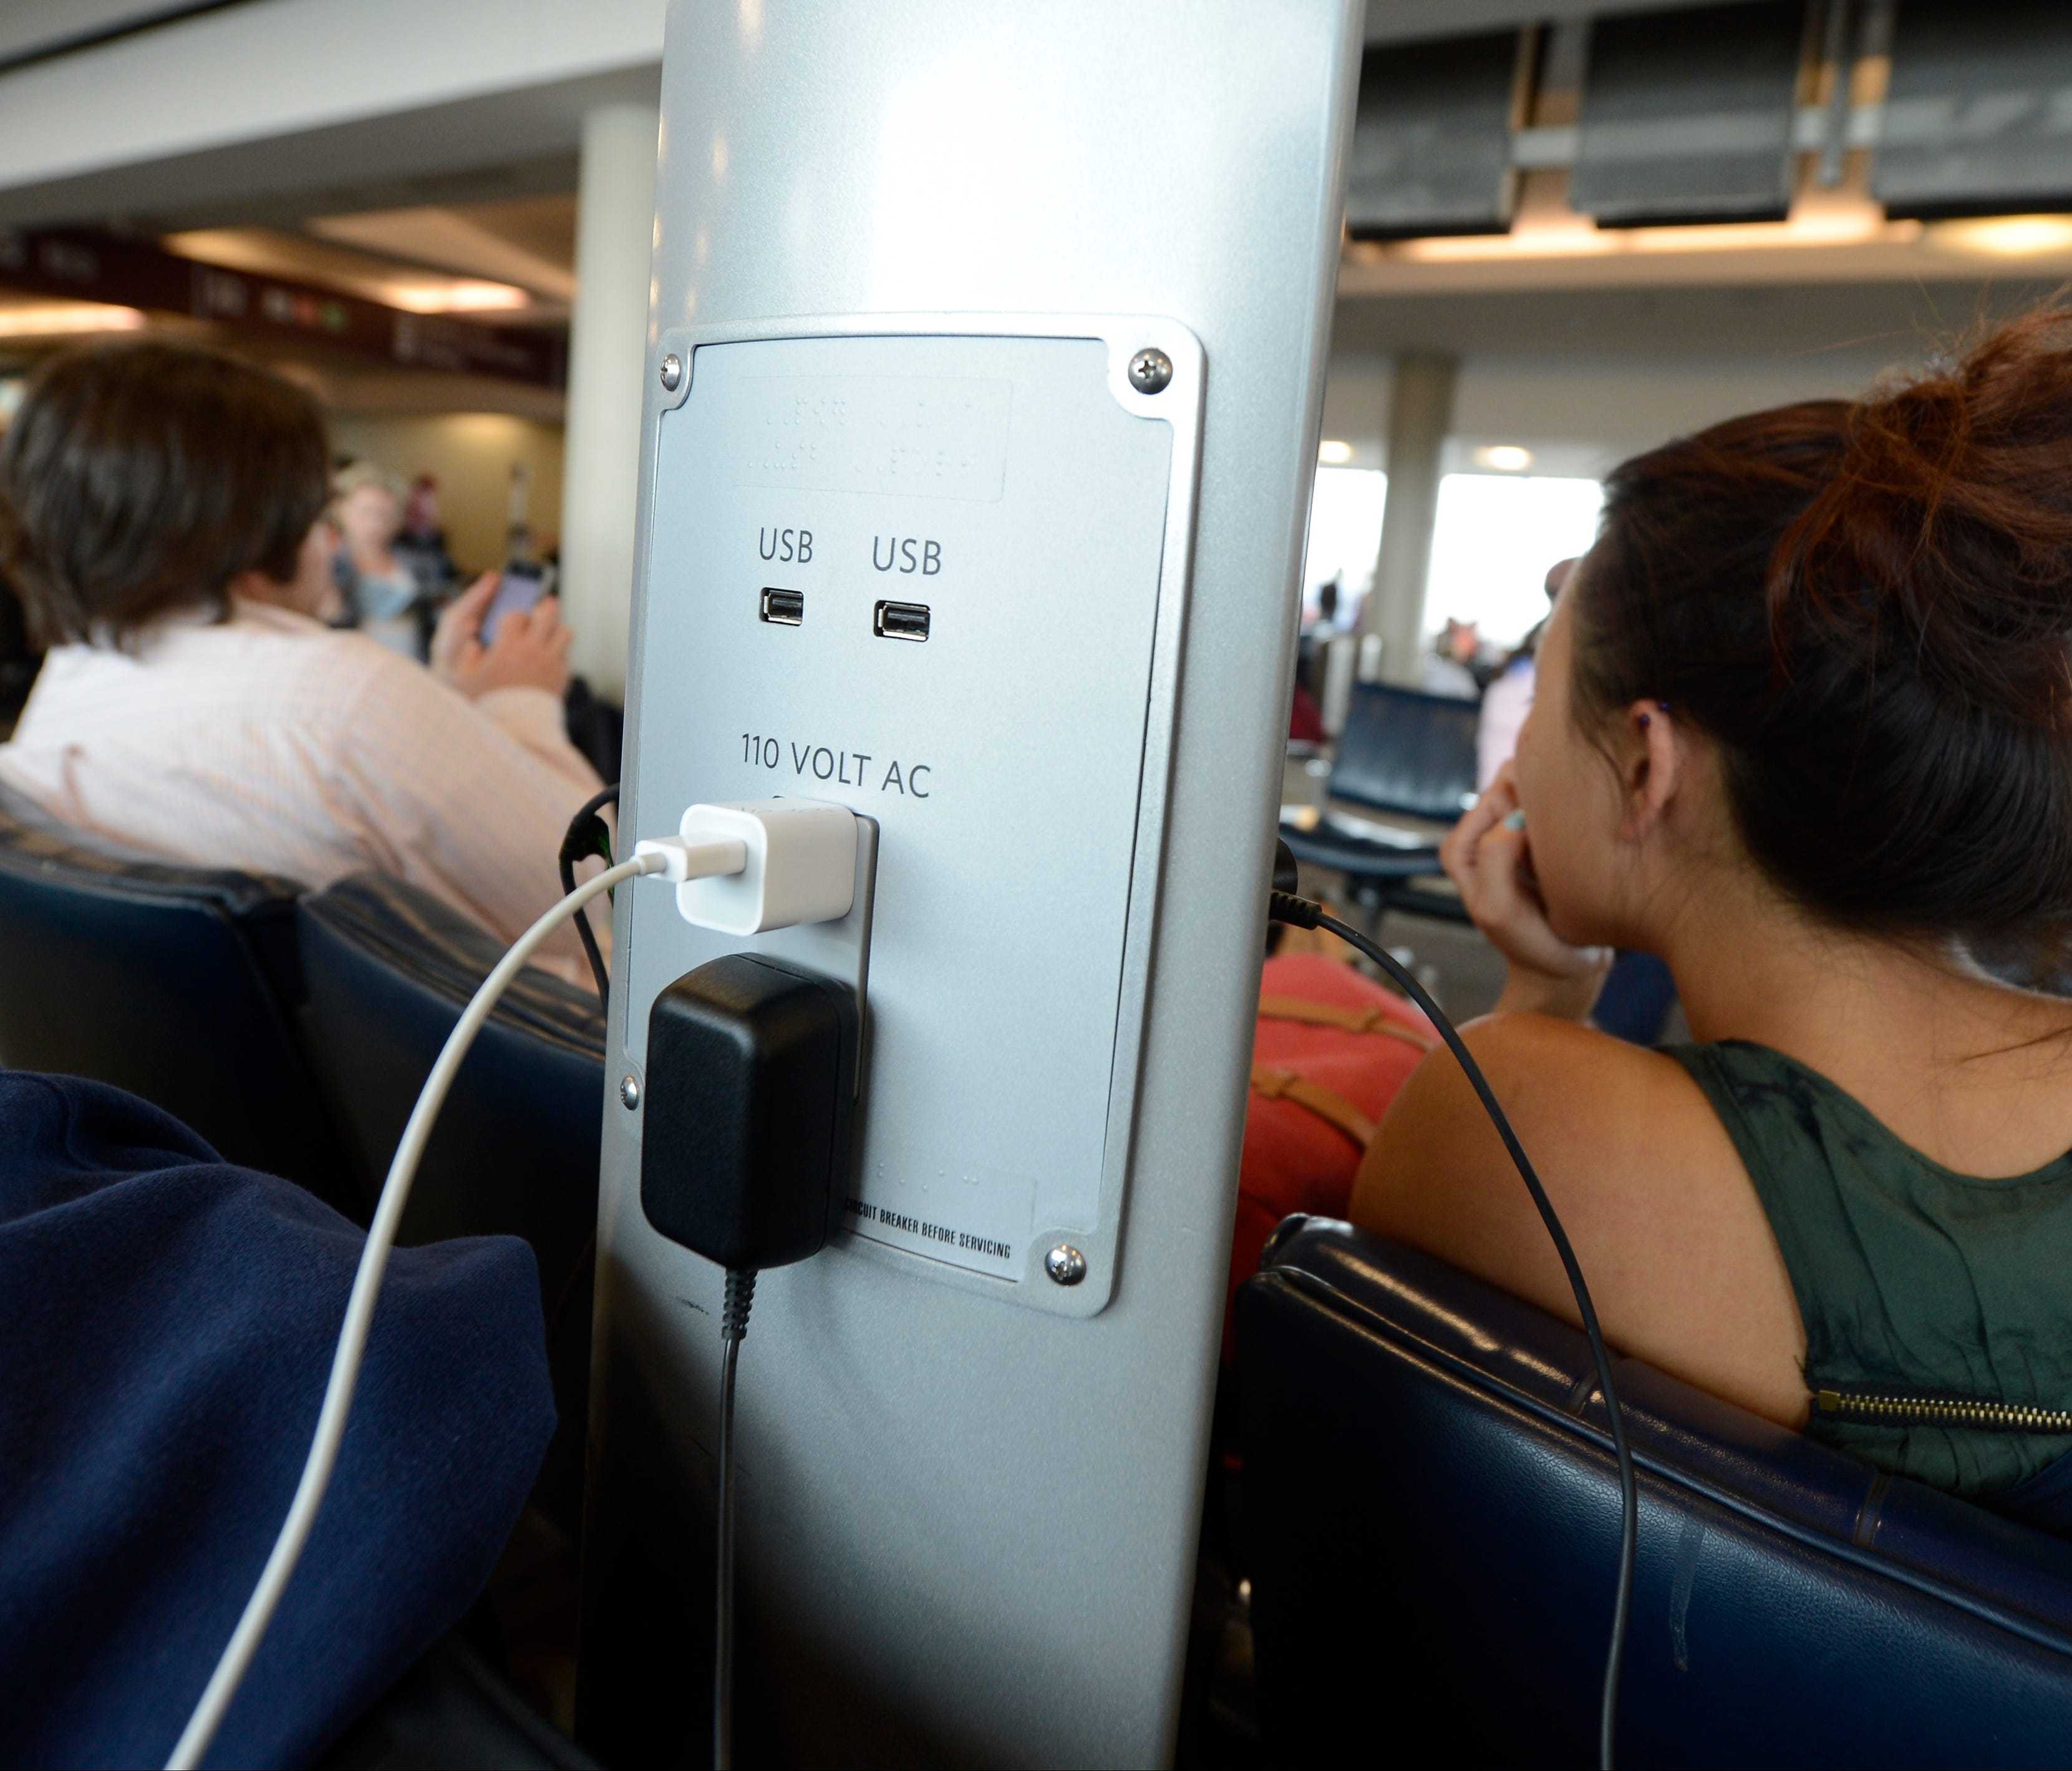 Who has the rights to the power outlet? The first person to use it.